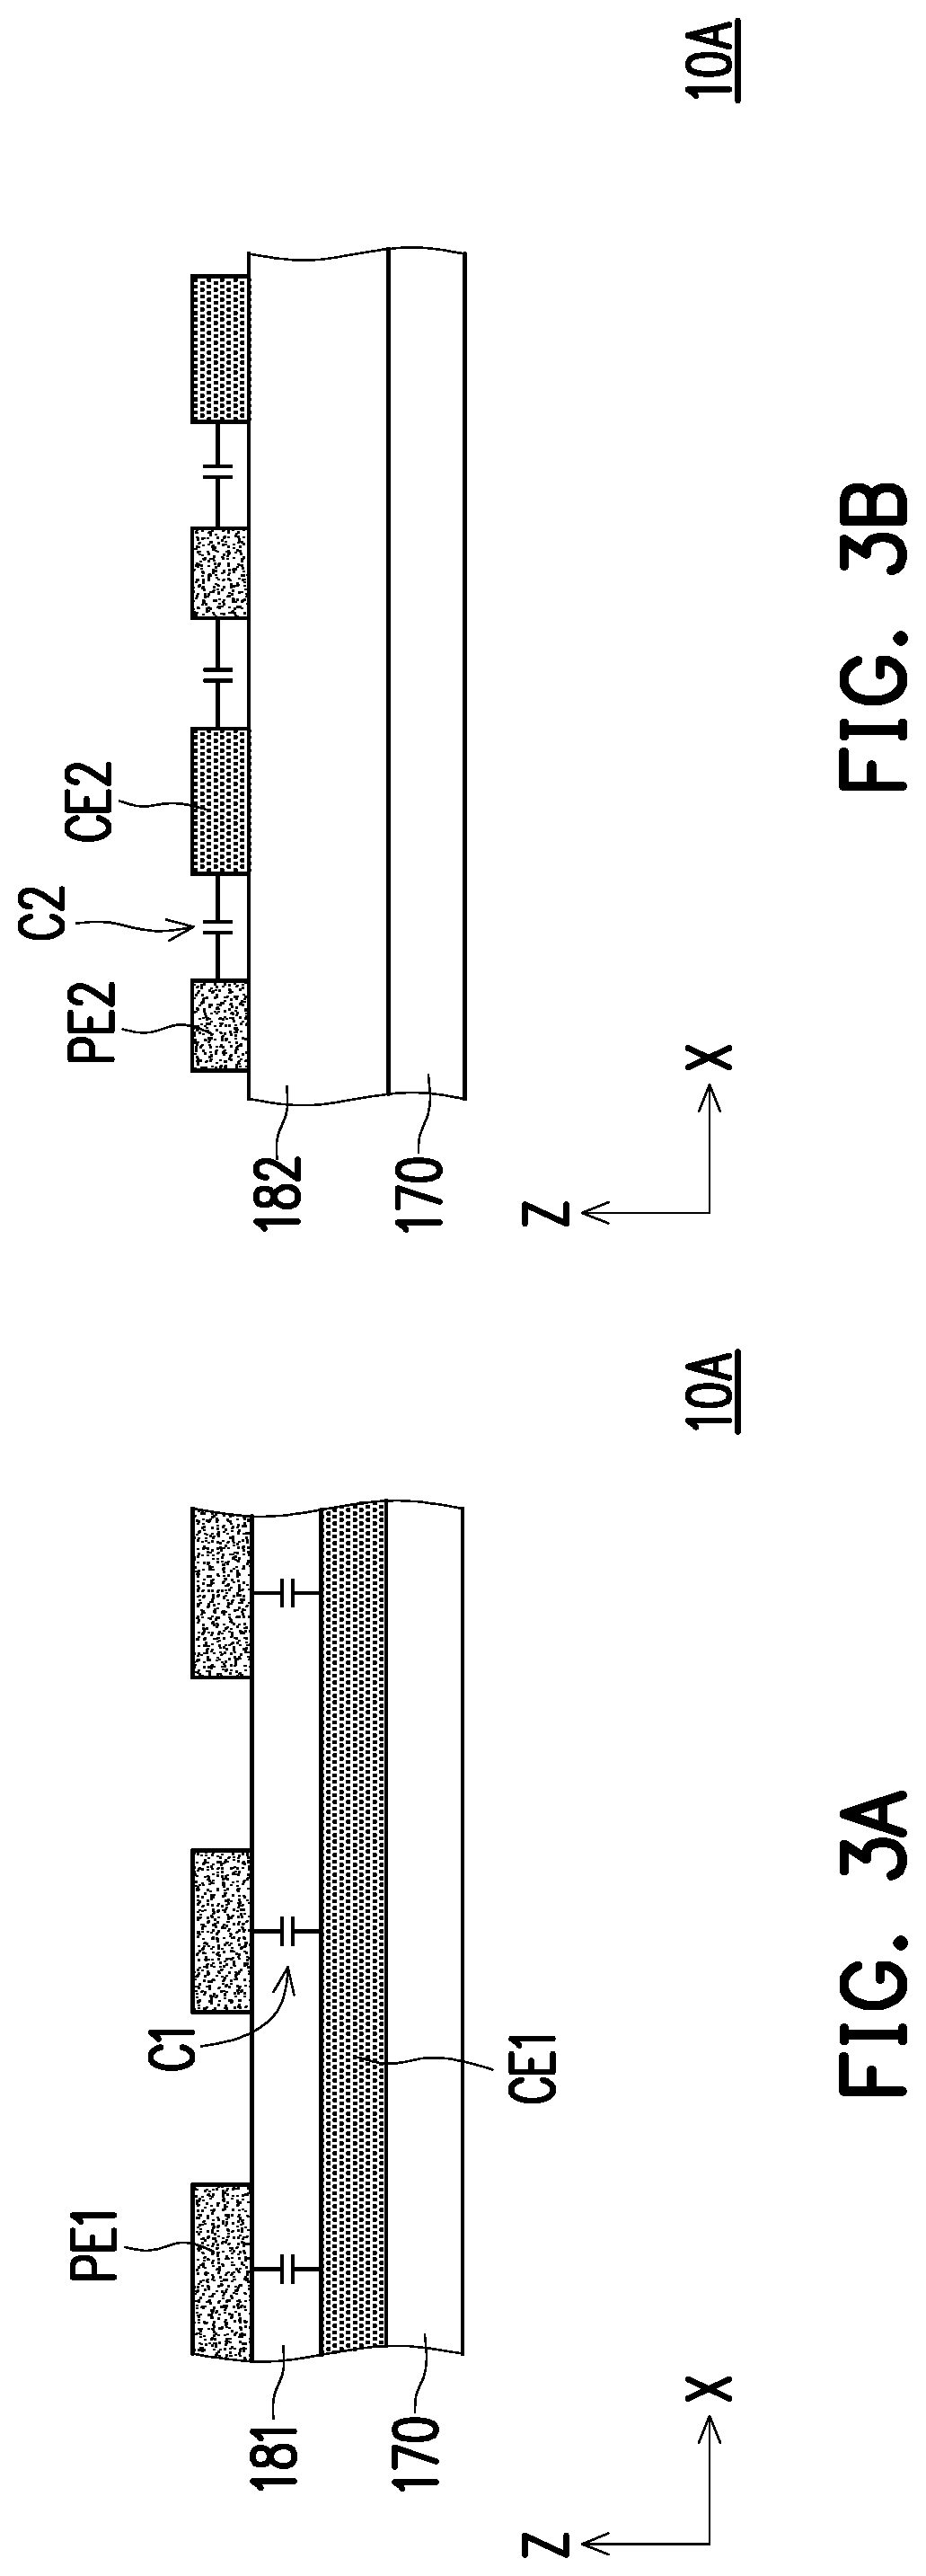 Display panel and electronic device